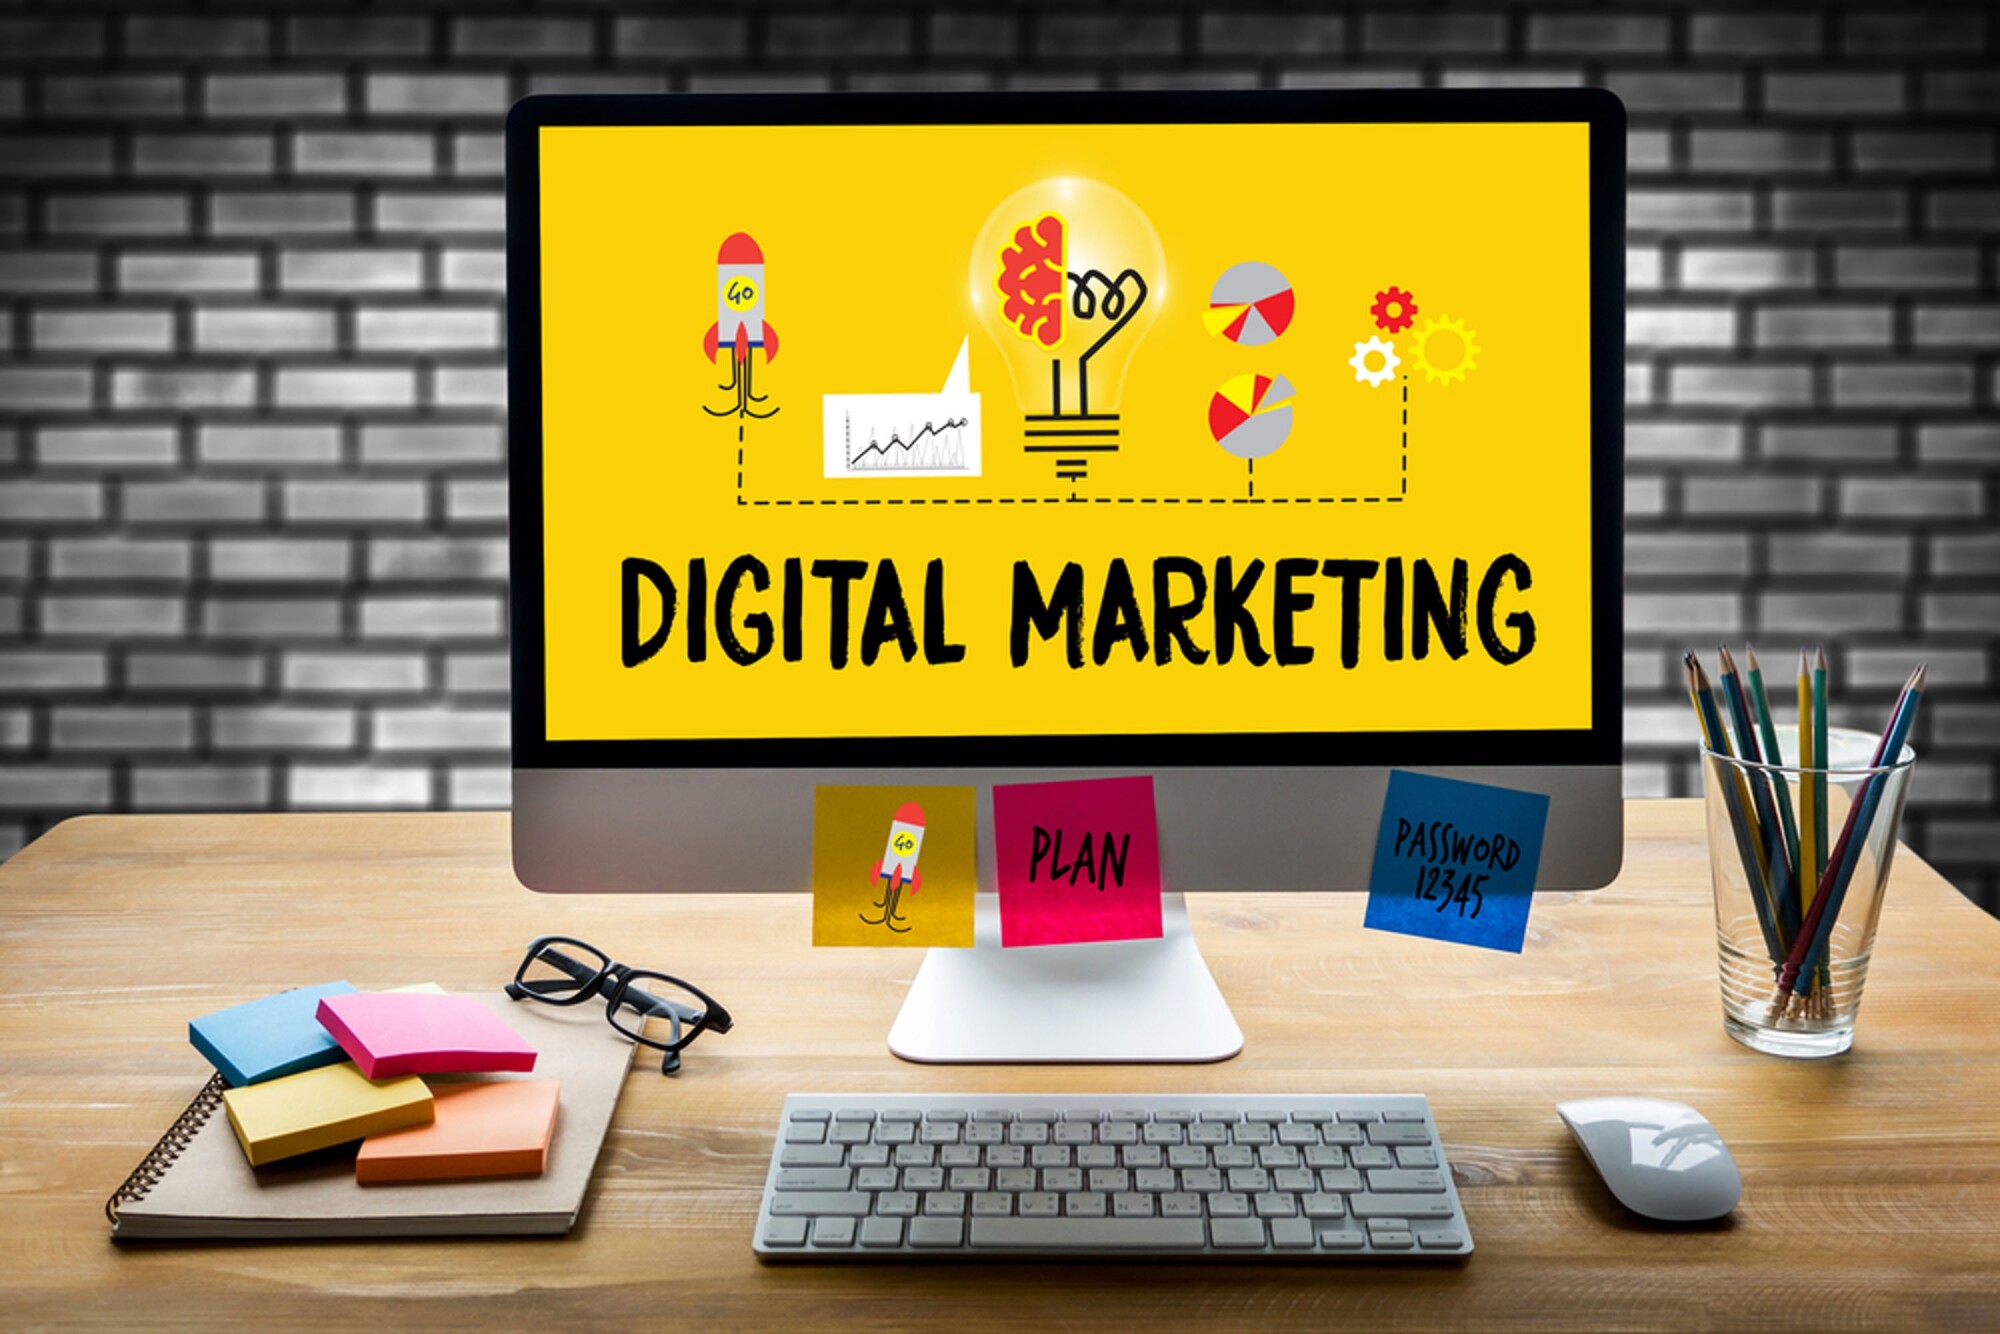 Digital Marketing Plan to Your Business